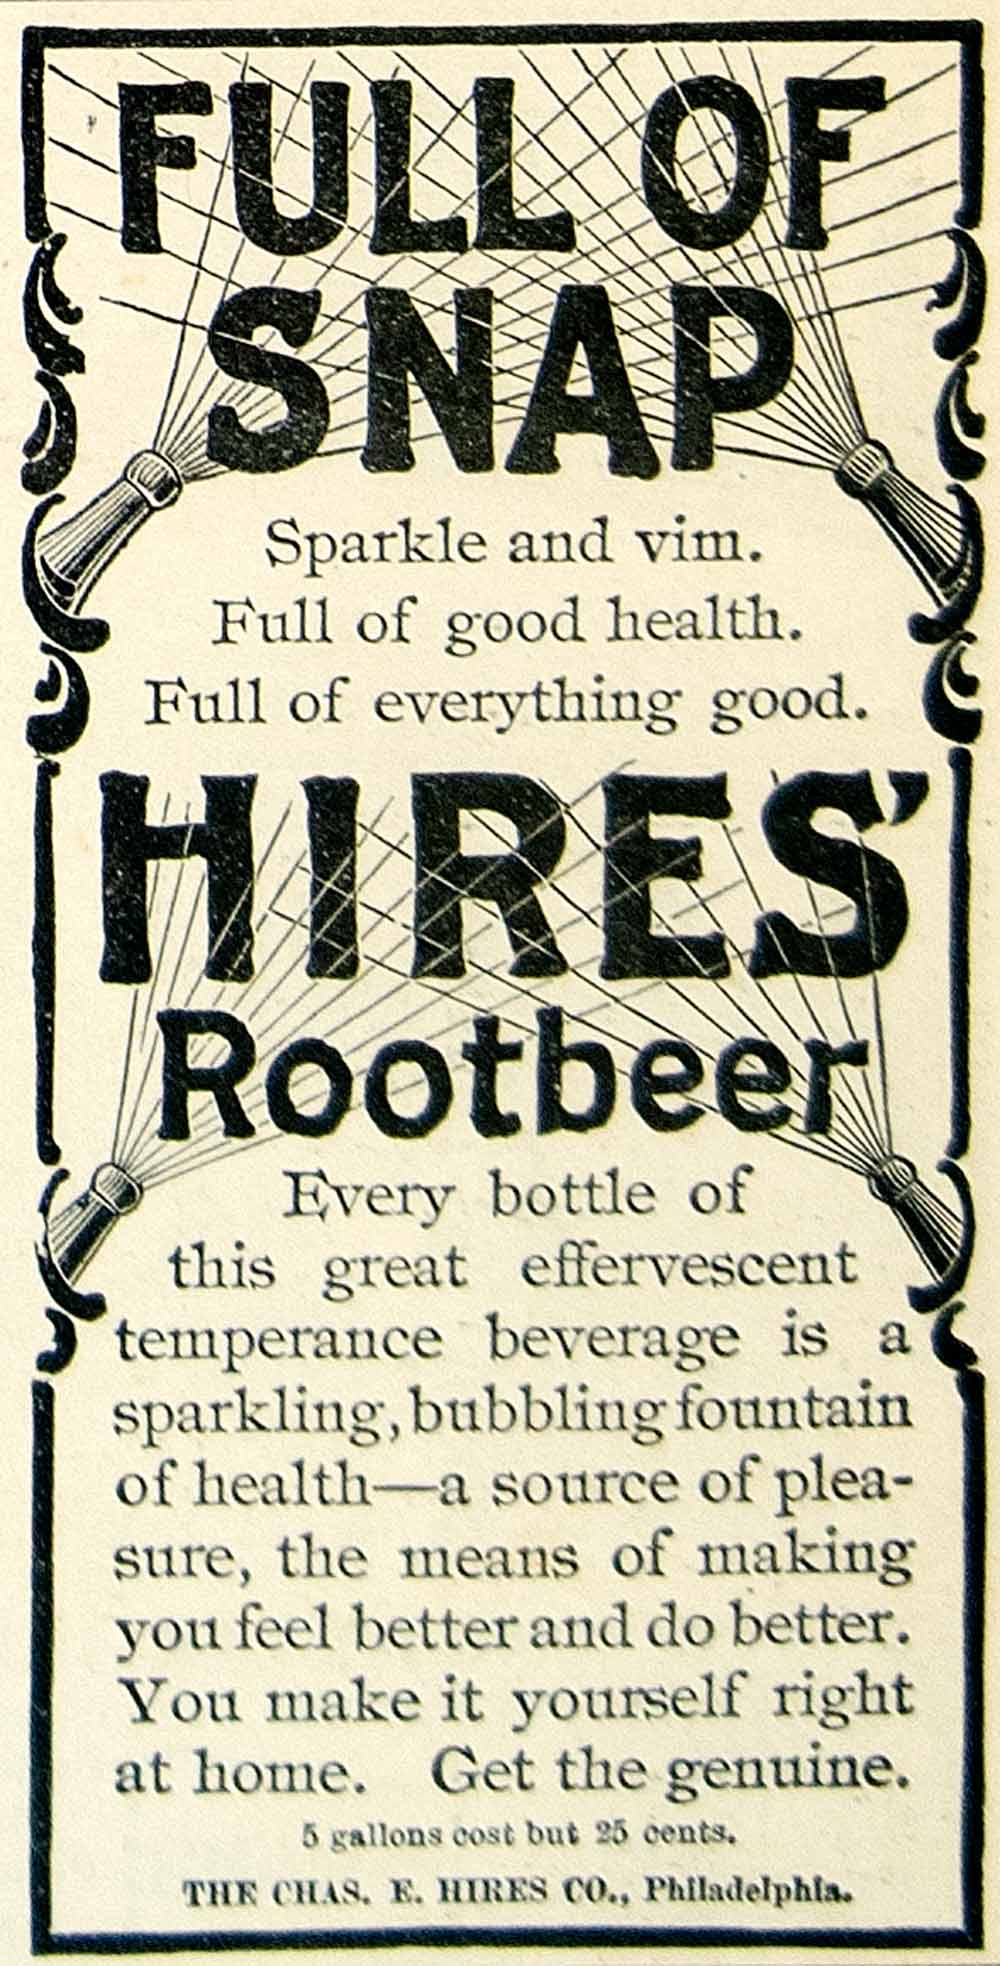 1895 Ad Charles E Hires Root Beer Soda Full Snap Bottle Spray Soft Drink CCG1